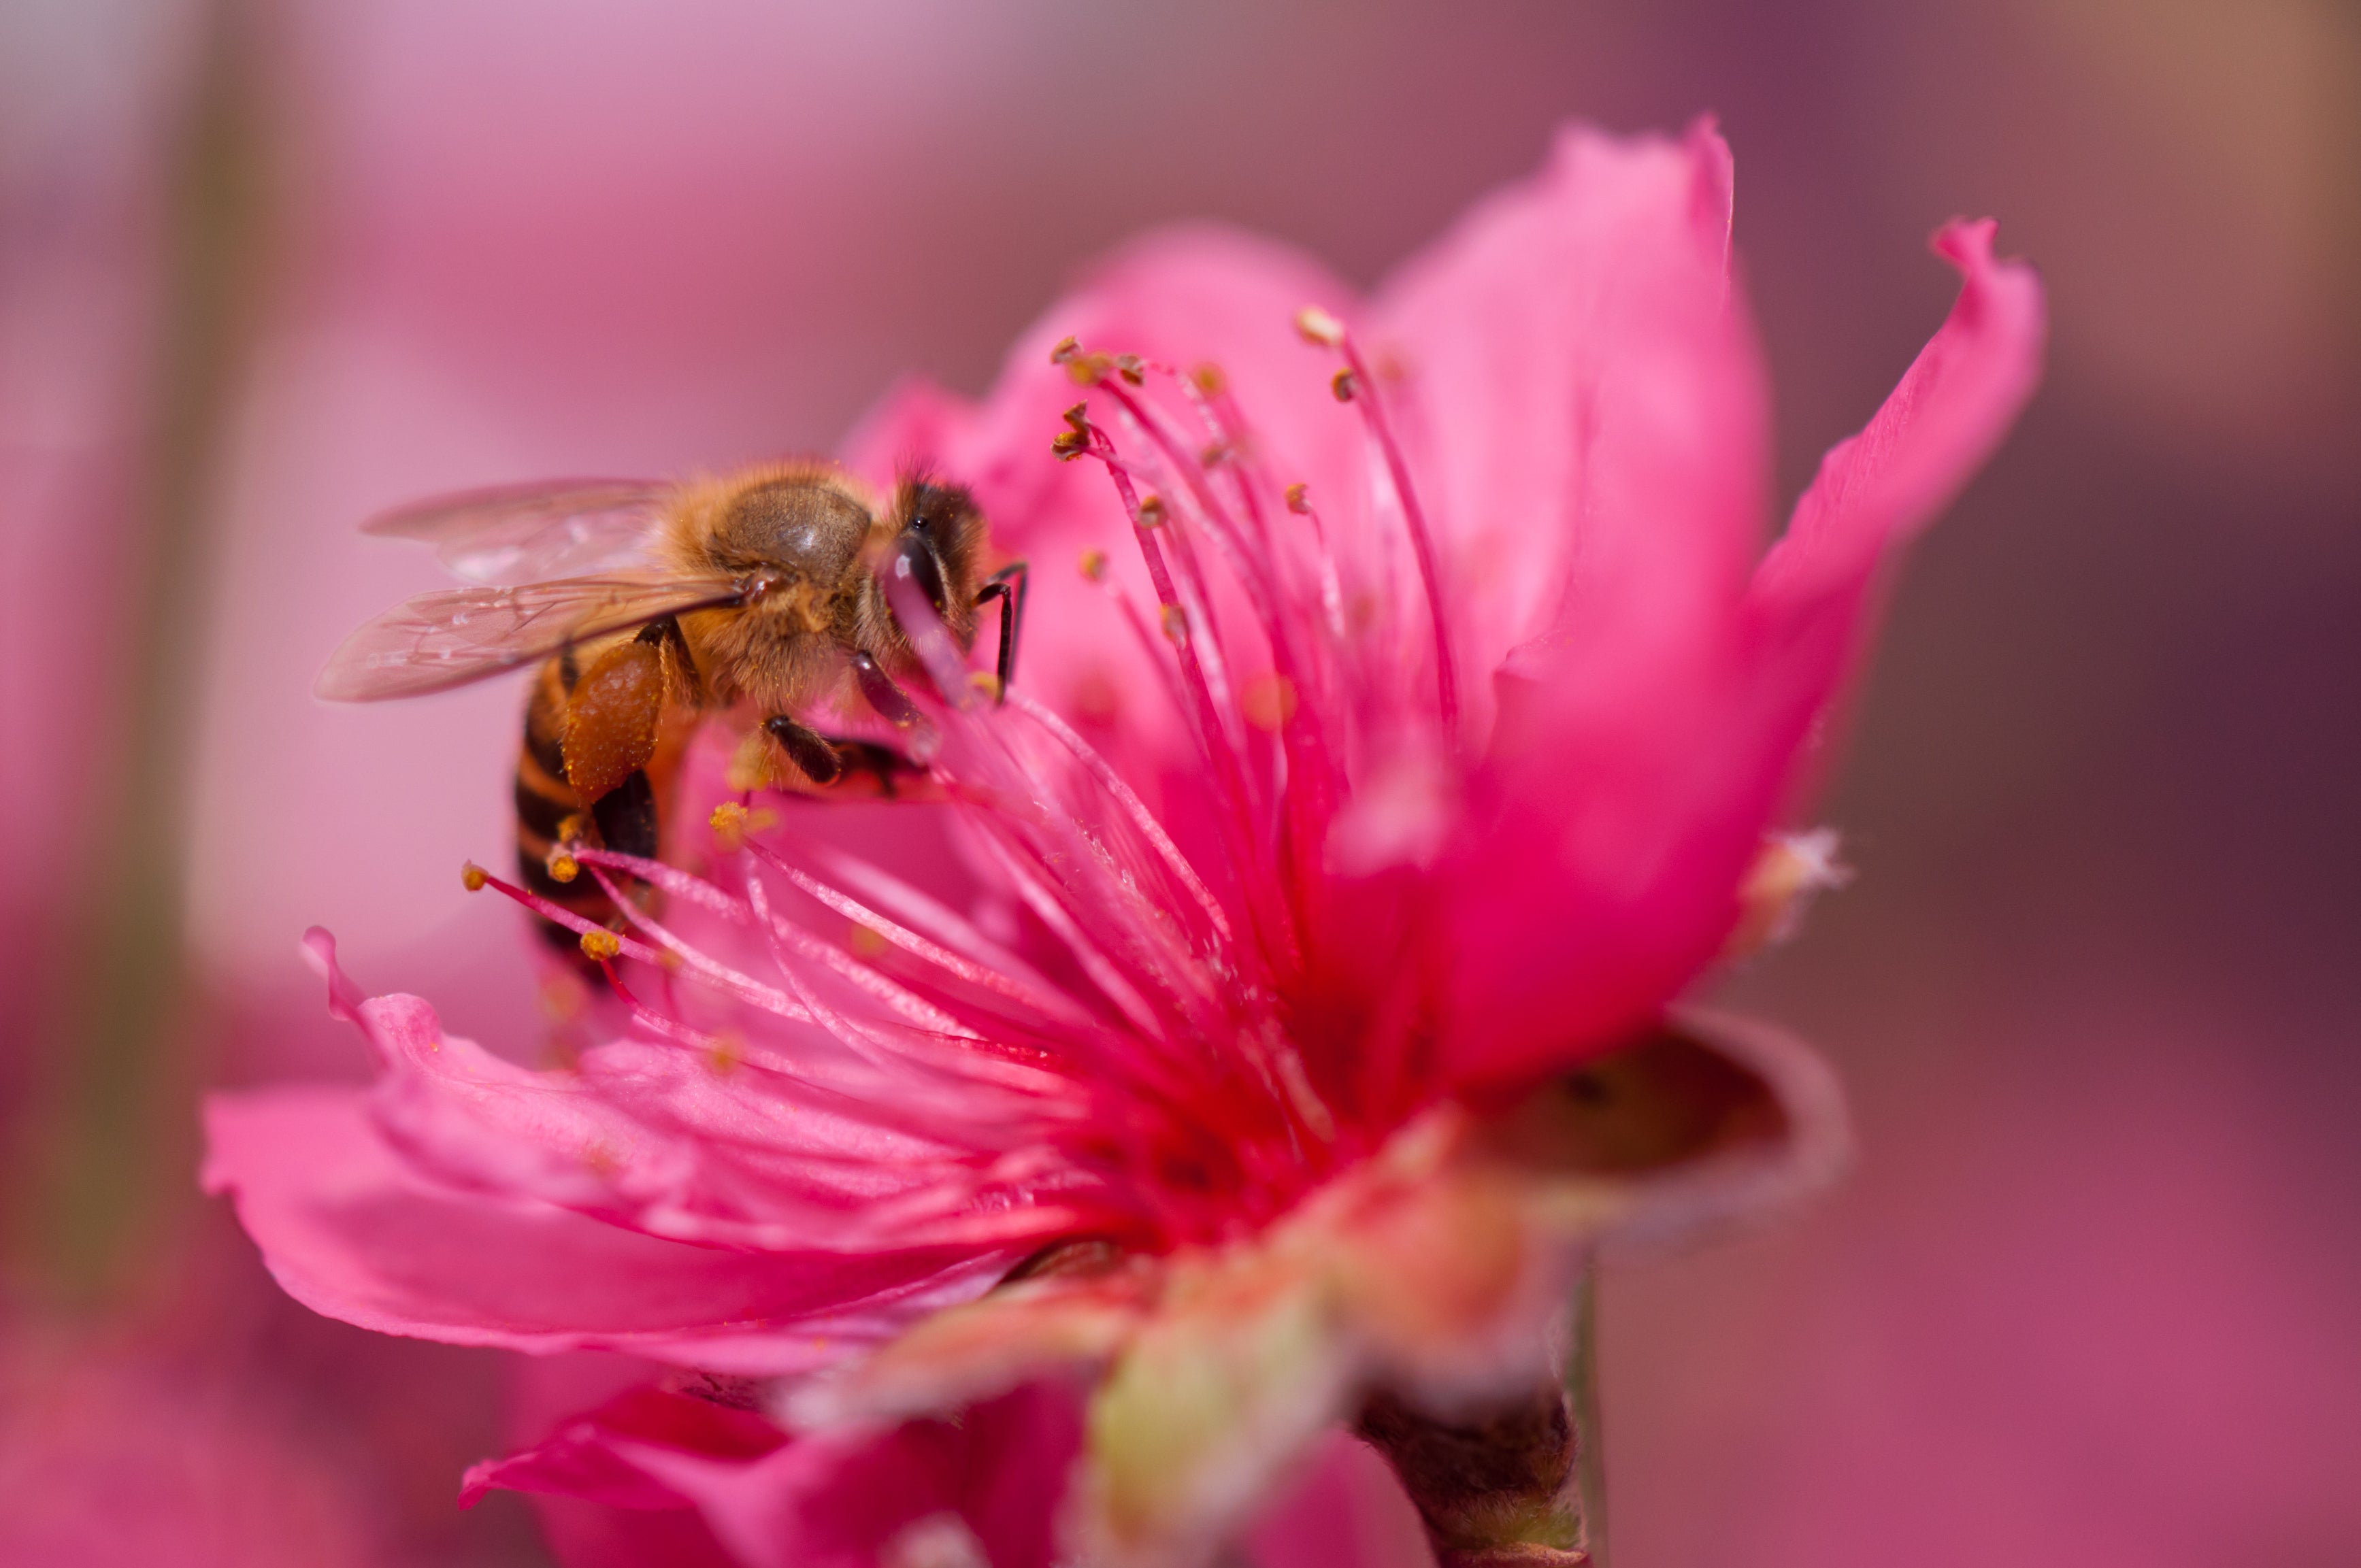 Part 3 & 4: Save the Bees Parts-  What is Causing  the Bees to Decline? What Can We Do?